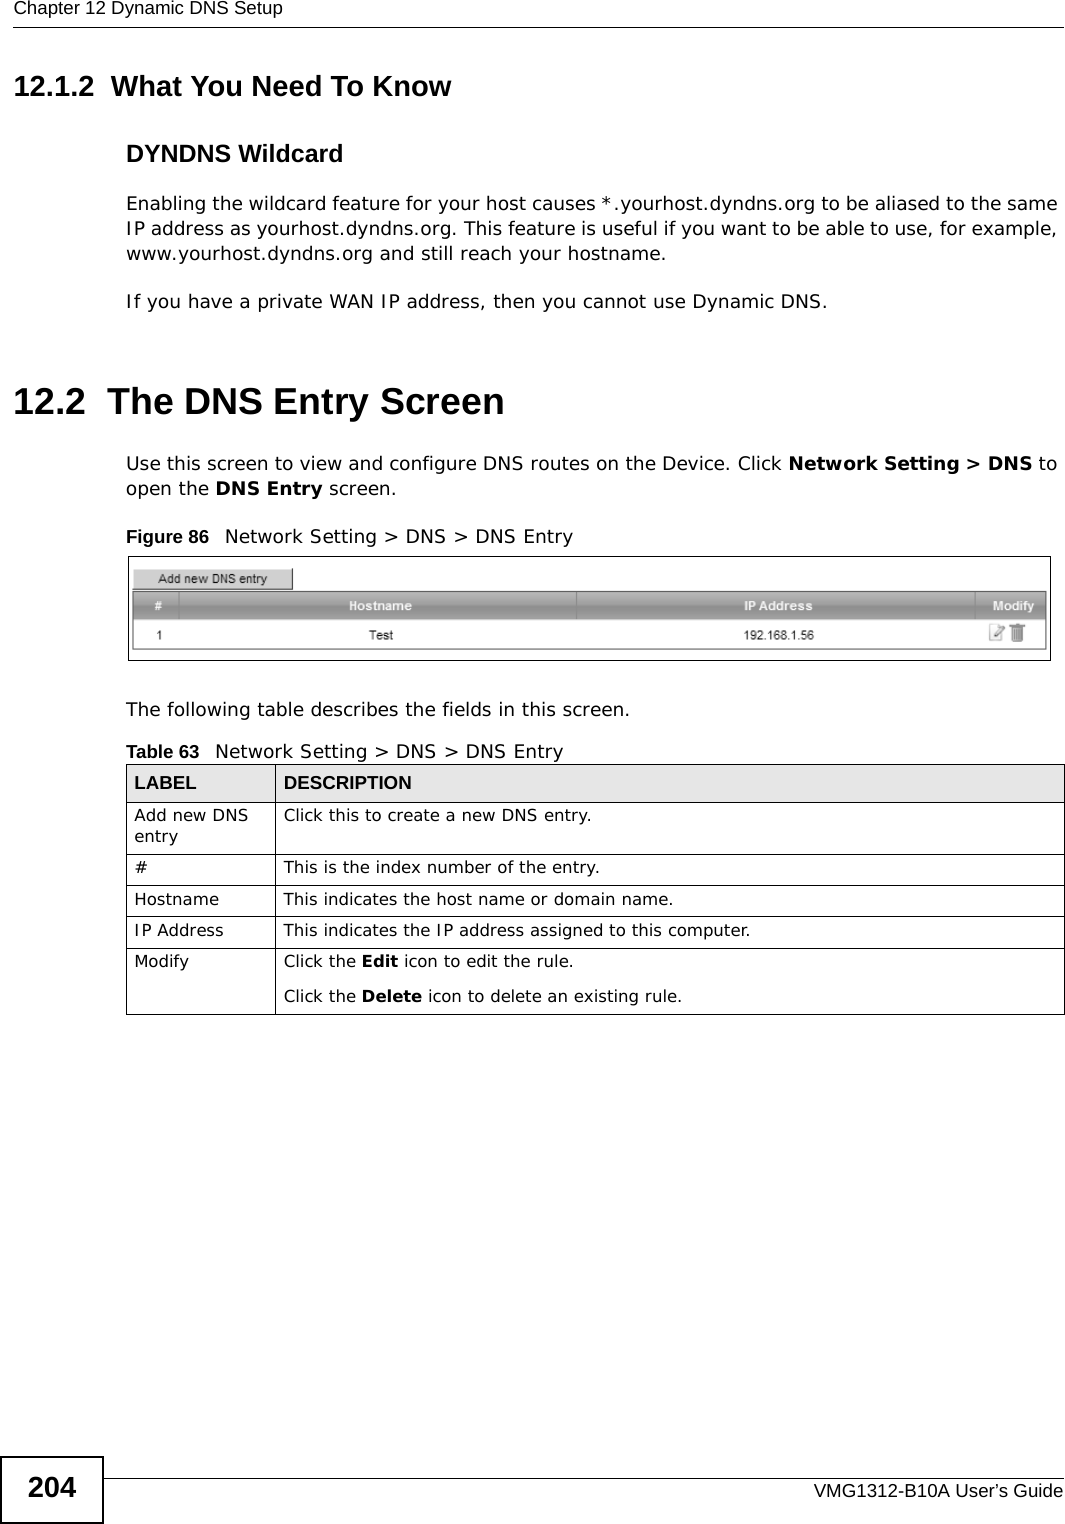 Chapter 12 Dynamic DNS SetupVMG1312-B10A User’s Guide20412.1.2  What You Need To KnowDYNDNS WildcardEnabling the wildcard feature for your host causes *.yourhost.dyndns.org to be aliased to the same IP address as yourhost.dyndns.org. This feature is useful if you want to be able to use, for example, www.yourhost.dyndns.org and still reach your hostname.If you have a private WAN IP address, then you cannot use Dynamic DNS.12.2  The DNS Entry ScreenUse this screen to view and configure DNS routes on the Device. Click Network Setting &gt; DNS to open the DNS Entry screen.Figure 86   Network Setting &gt; DNS &gt; DNS EntryThe following table describes the fields in this screen. Table 63   Network Setting &gt; DNS &gt; DNS EntryLABEL DESCRIPTIONAdd new DNS entry Click this to create a new DNS entry.#This is the index number of the entry.Hostname This indicates the host name or domain name.IP Address This indicates the IP address assigned to this computer.Modify Click the Edit icon to edit the rule.Click the Delete icon to delete an existing rule.